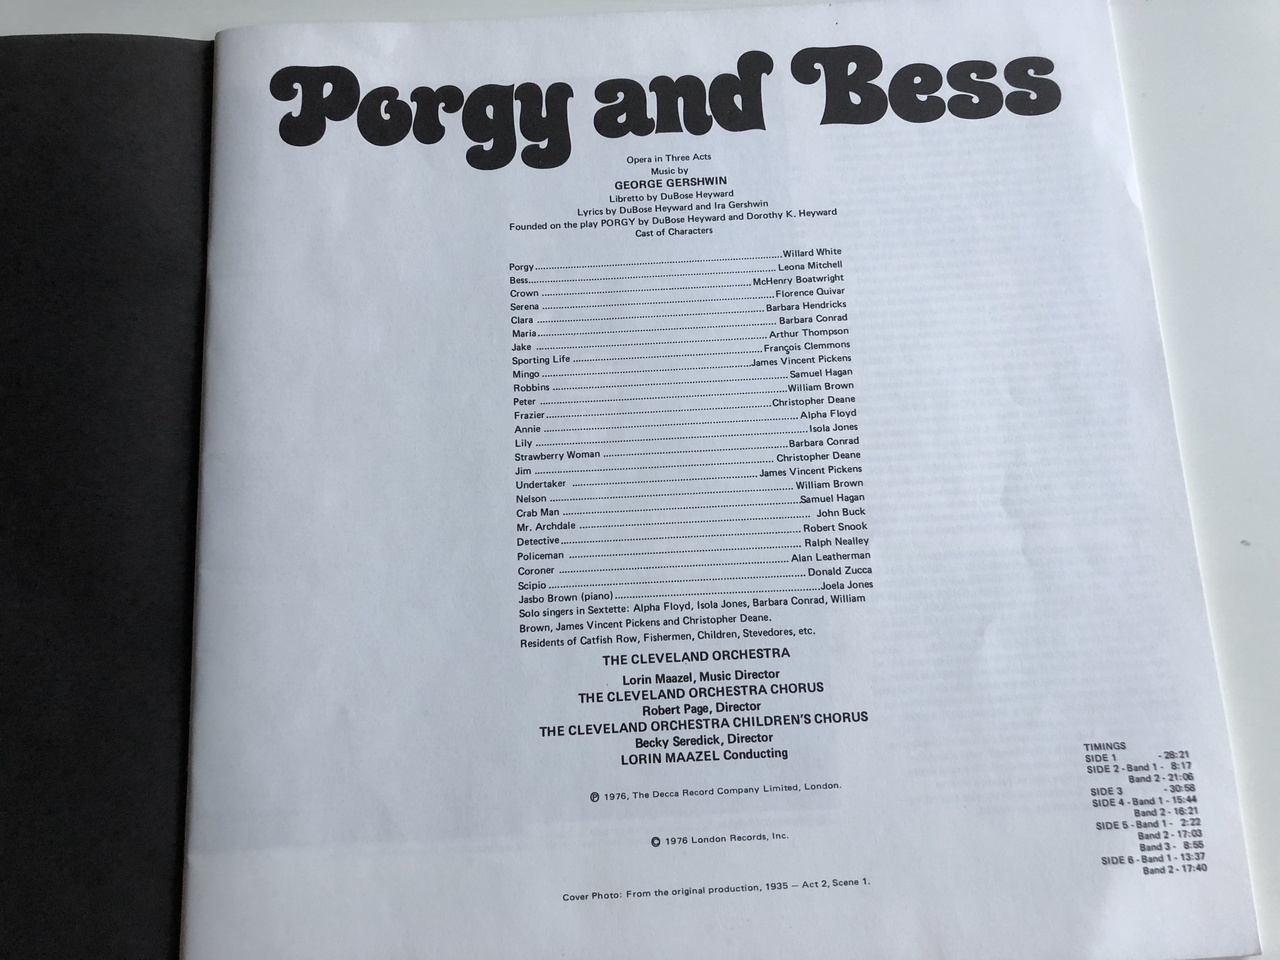 on what novel is george gershwins opera porgy and bess 1935 based